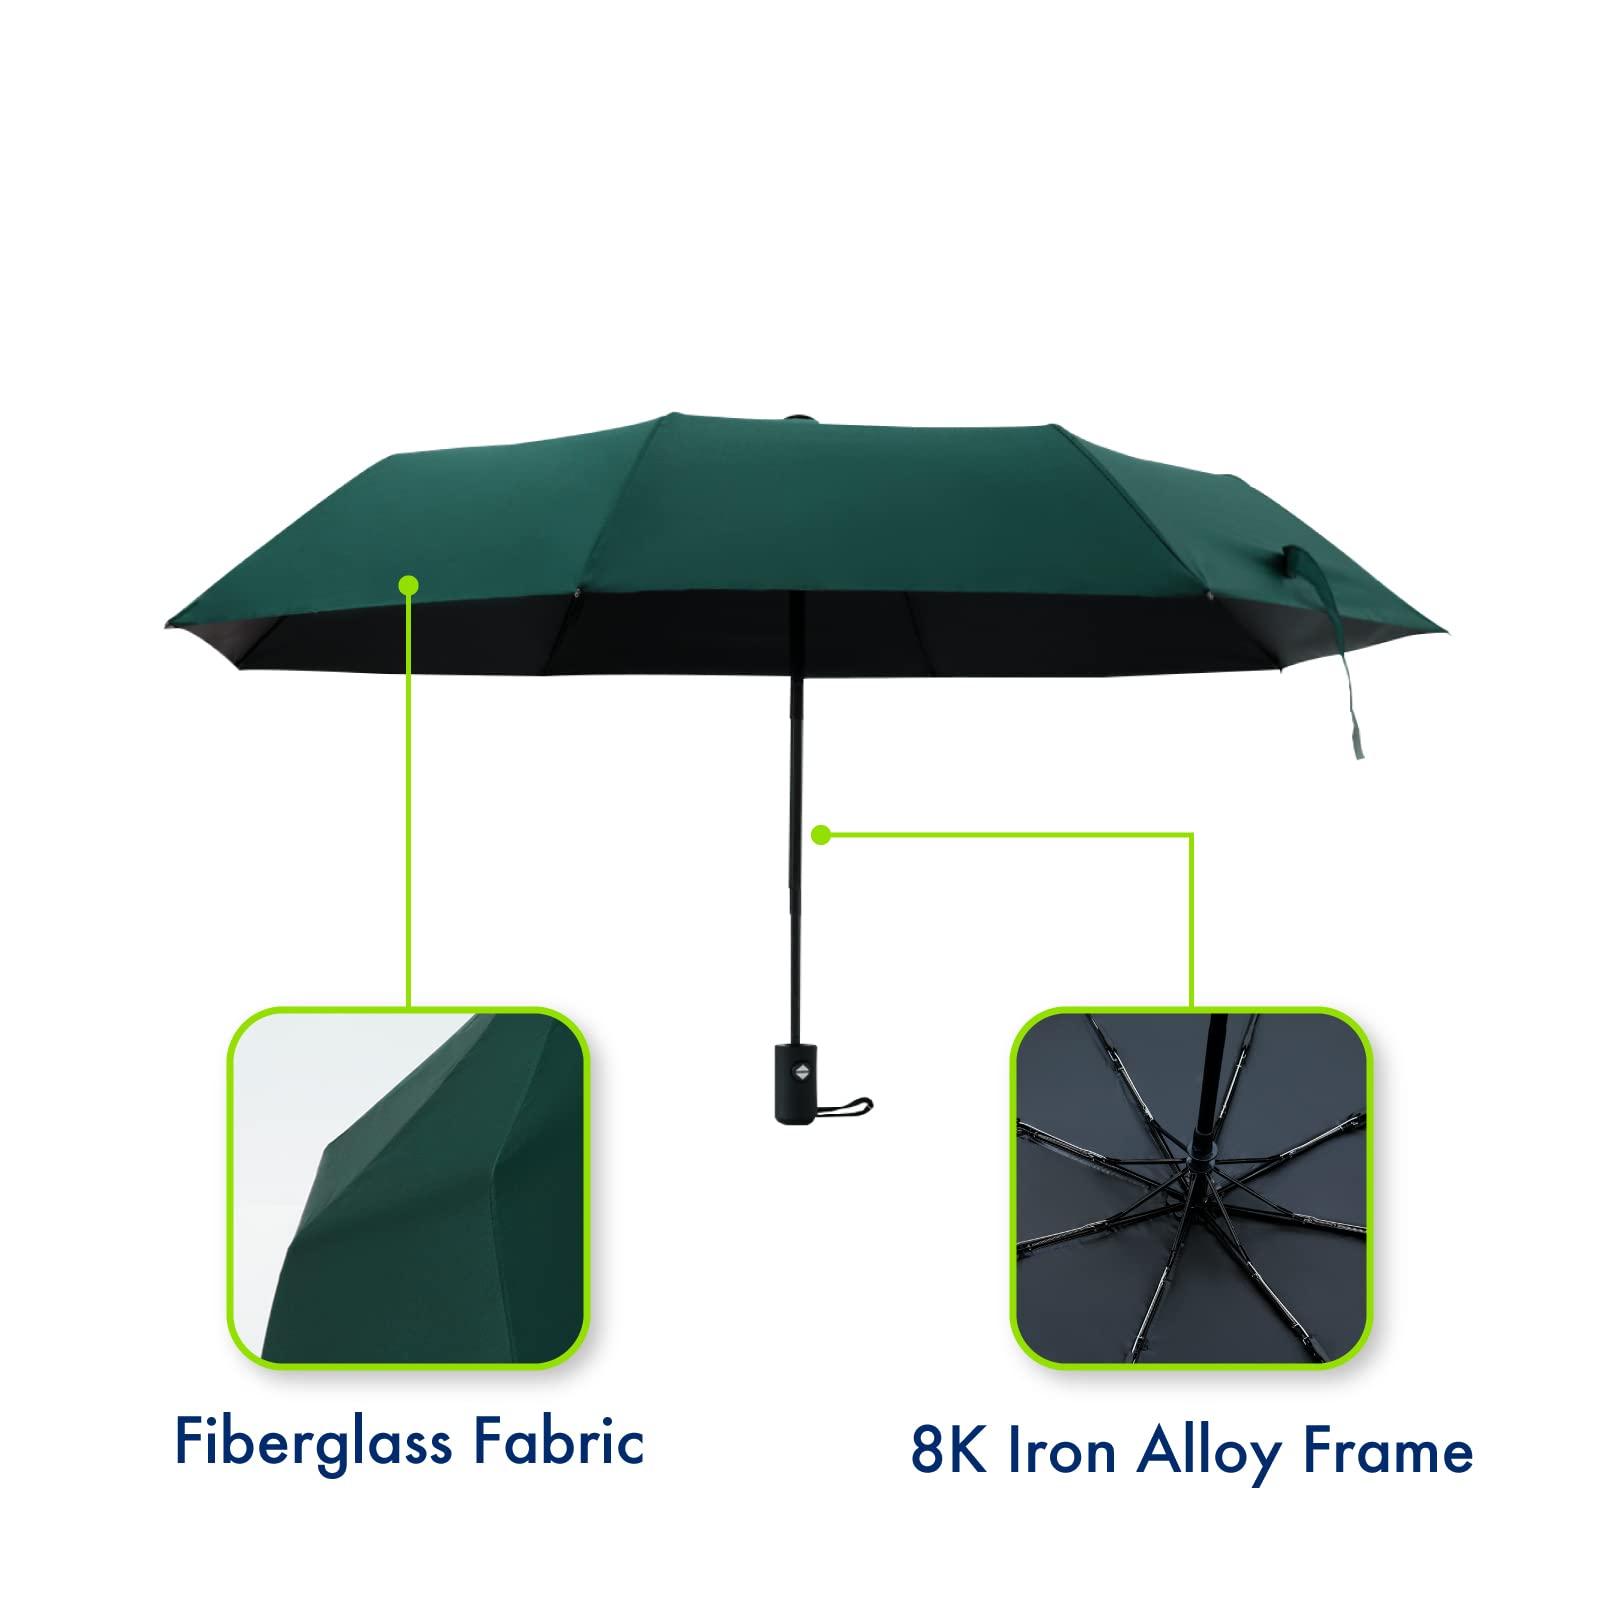 ABSORBIA Unisex 3 fold Umbrella for Rain & Sun Protection and also windproof | Double Layer Folding Portable Umbrella| Green colour | Fancy and Easy to Travel